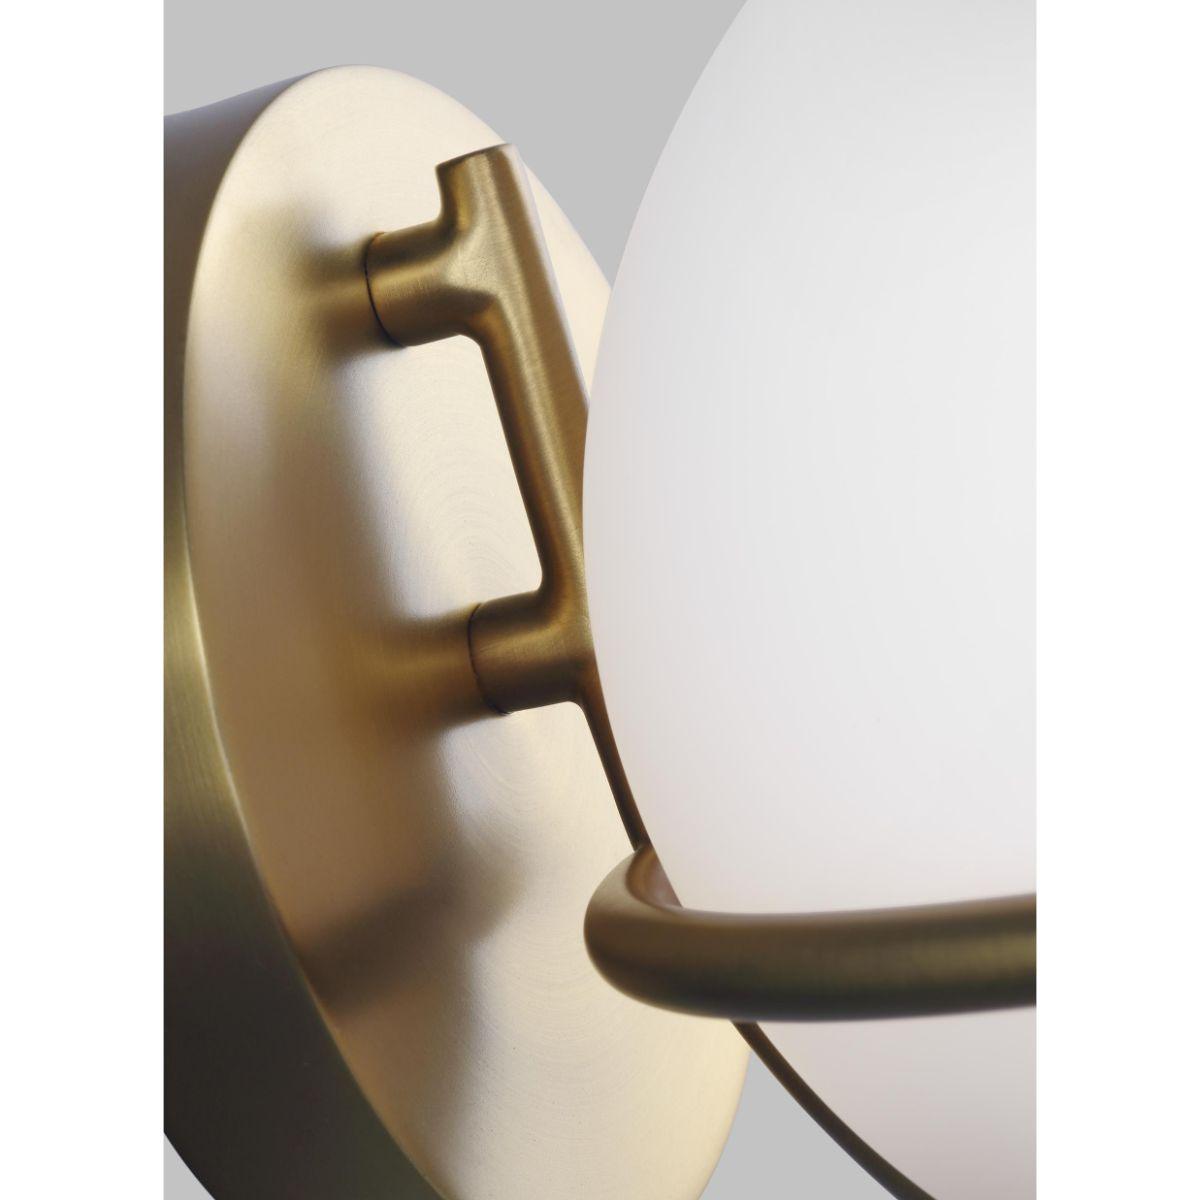 Apollo 8 in. Armed Sconce